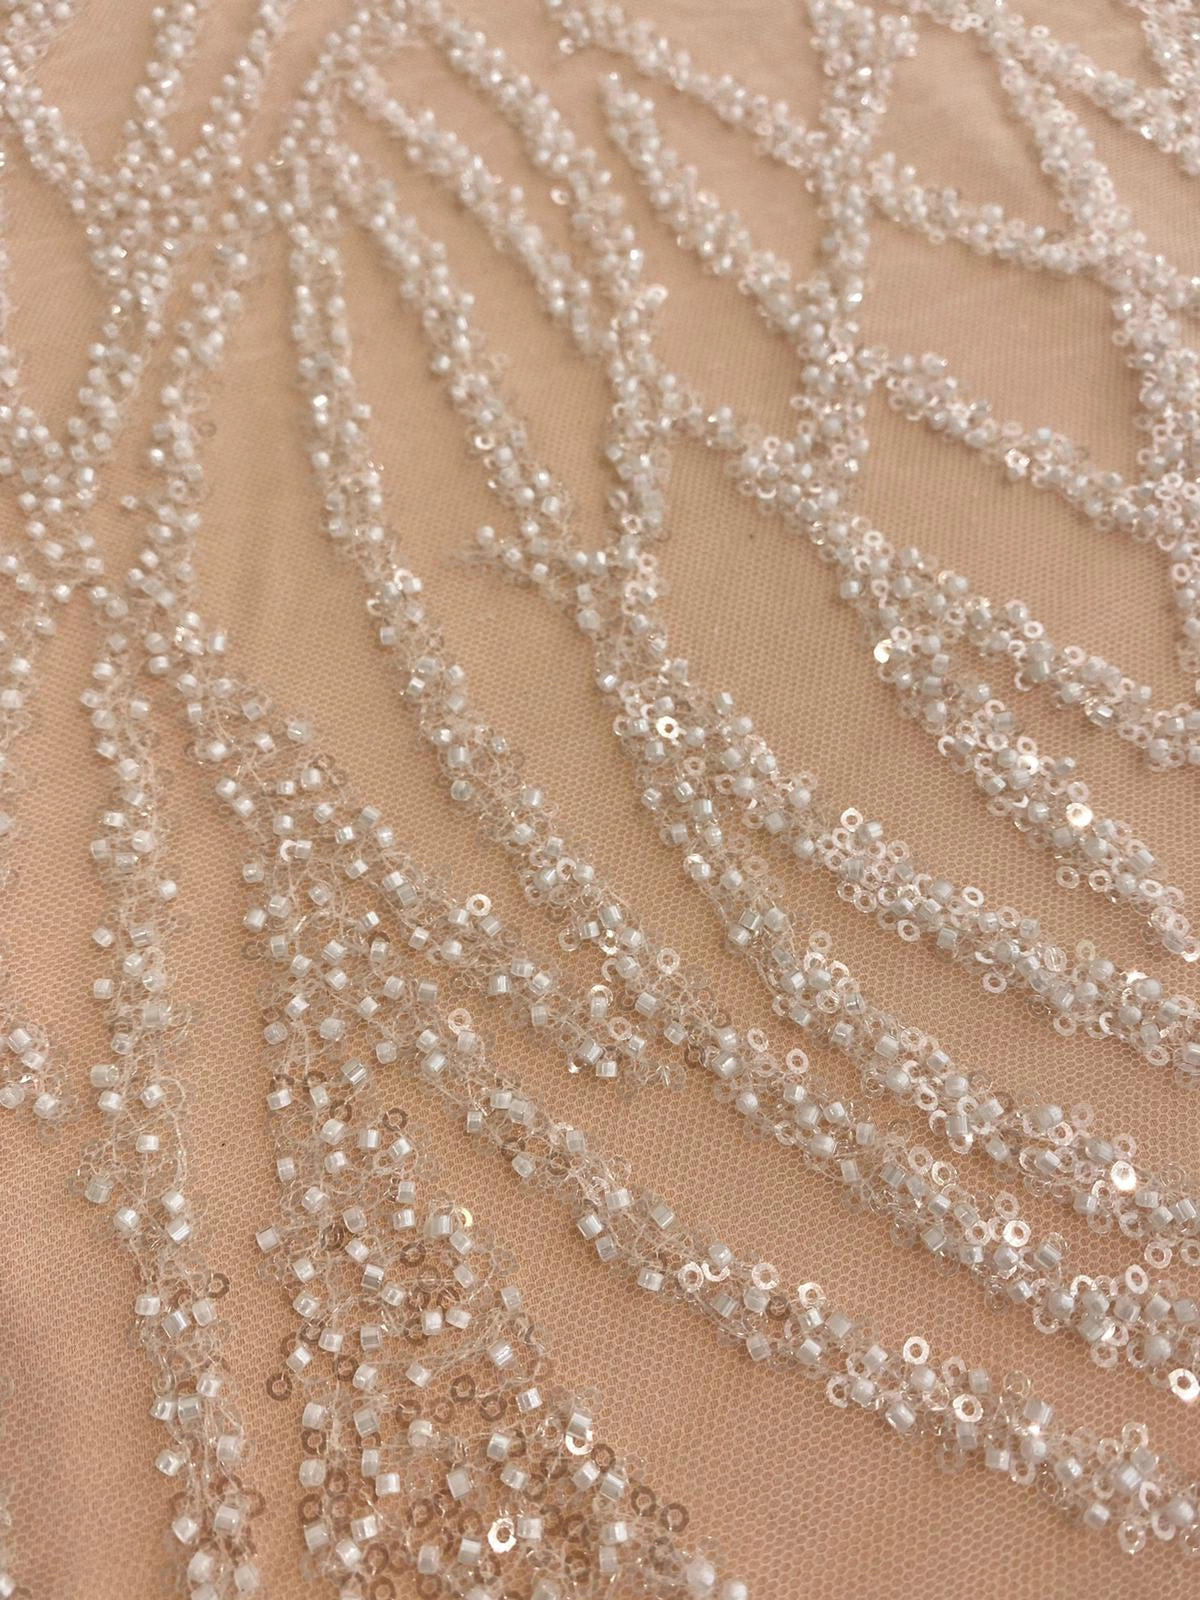 Ivory Lace with Strings, Pearls and Sequins